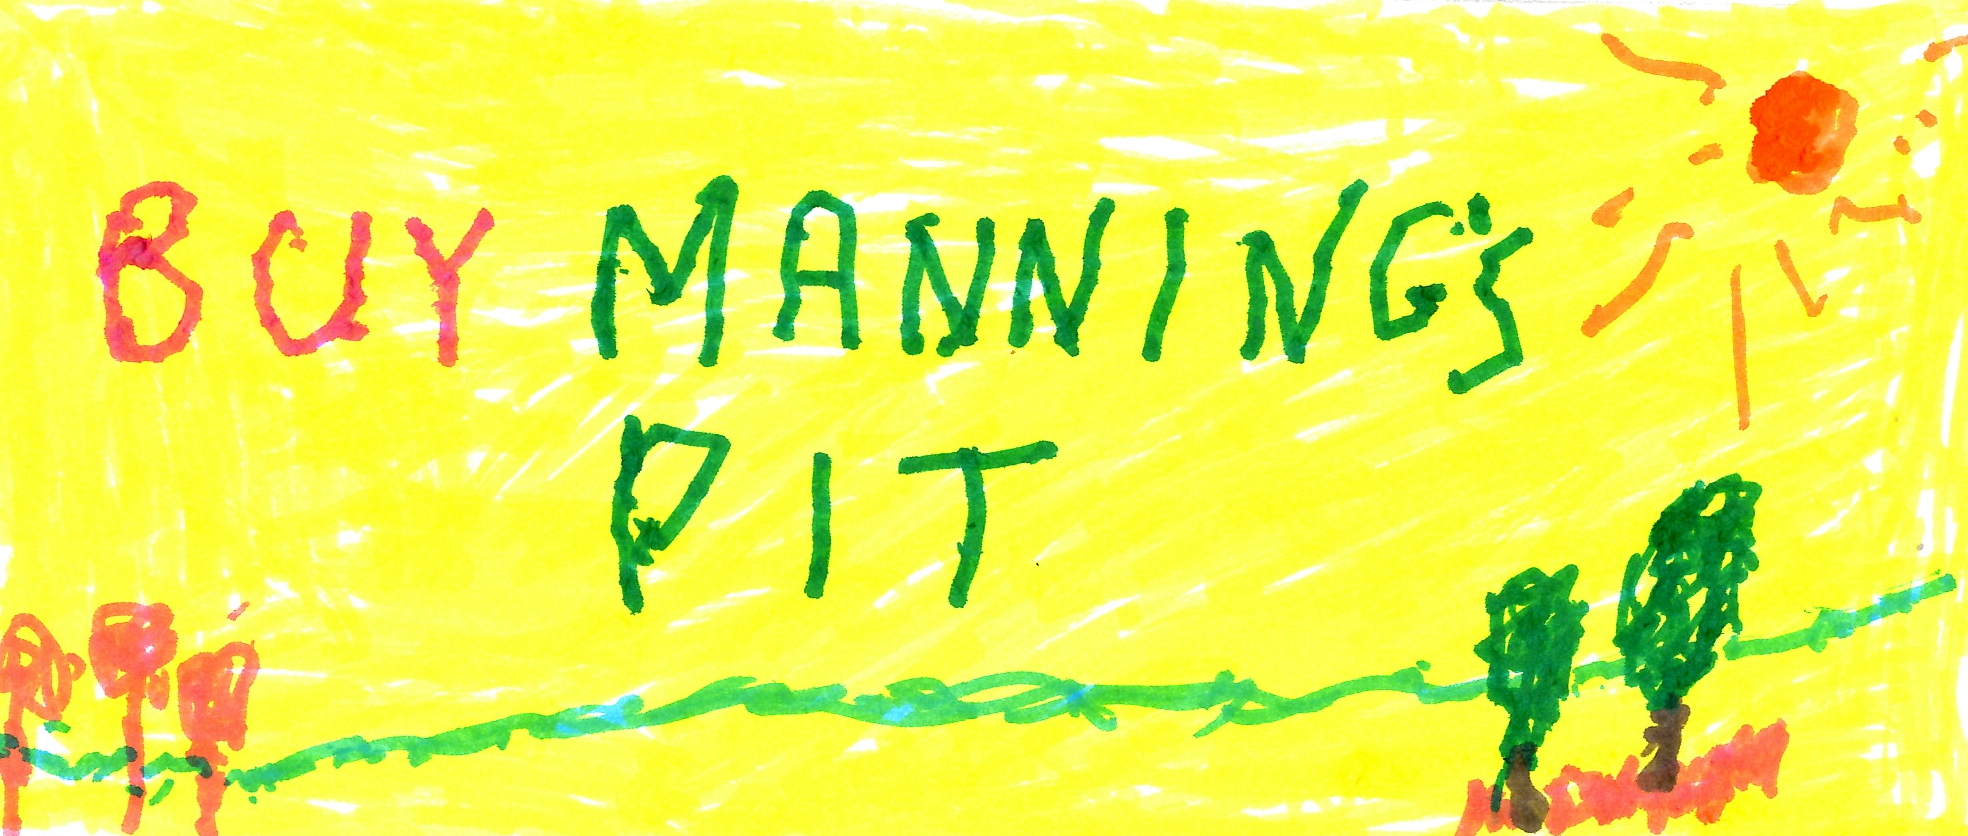 Buy Manning's Pit
                                                  poster